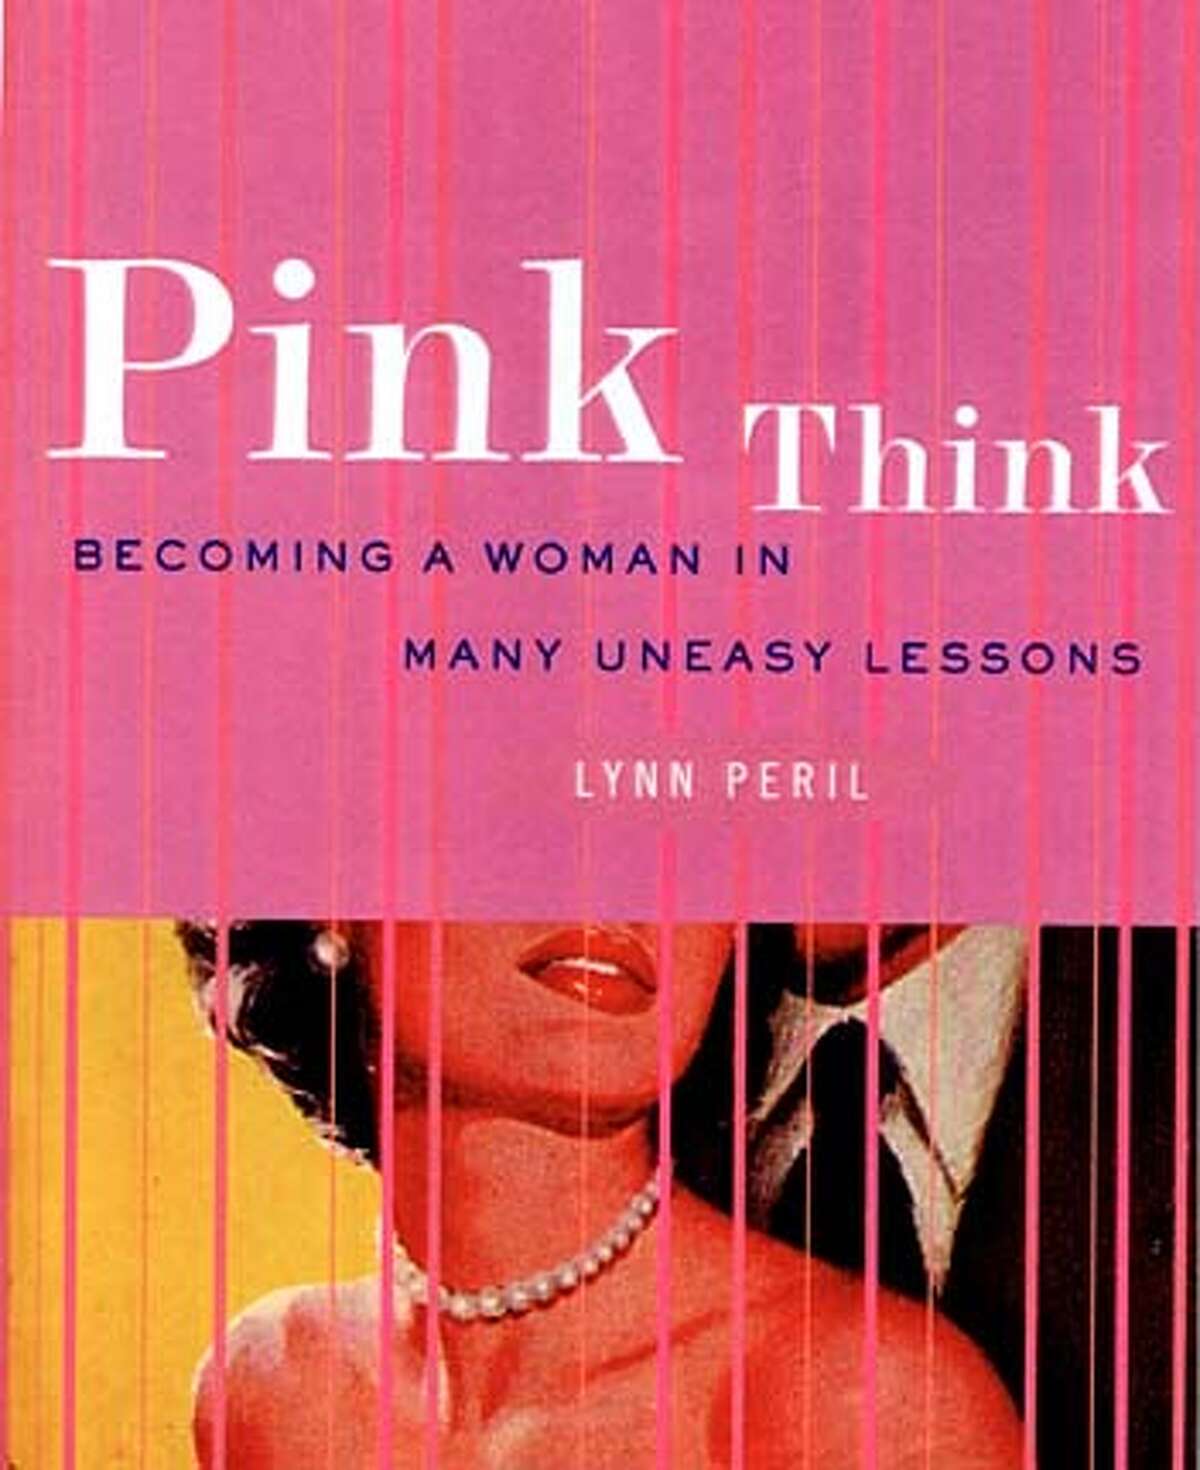 The feminine mystique / Oakland author uncovers pearls of wisdom from ...